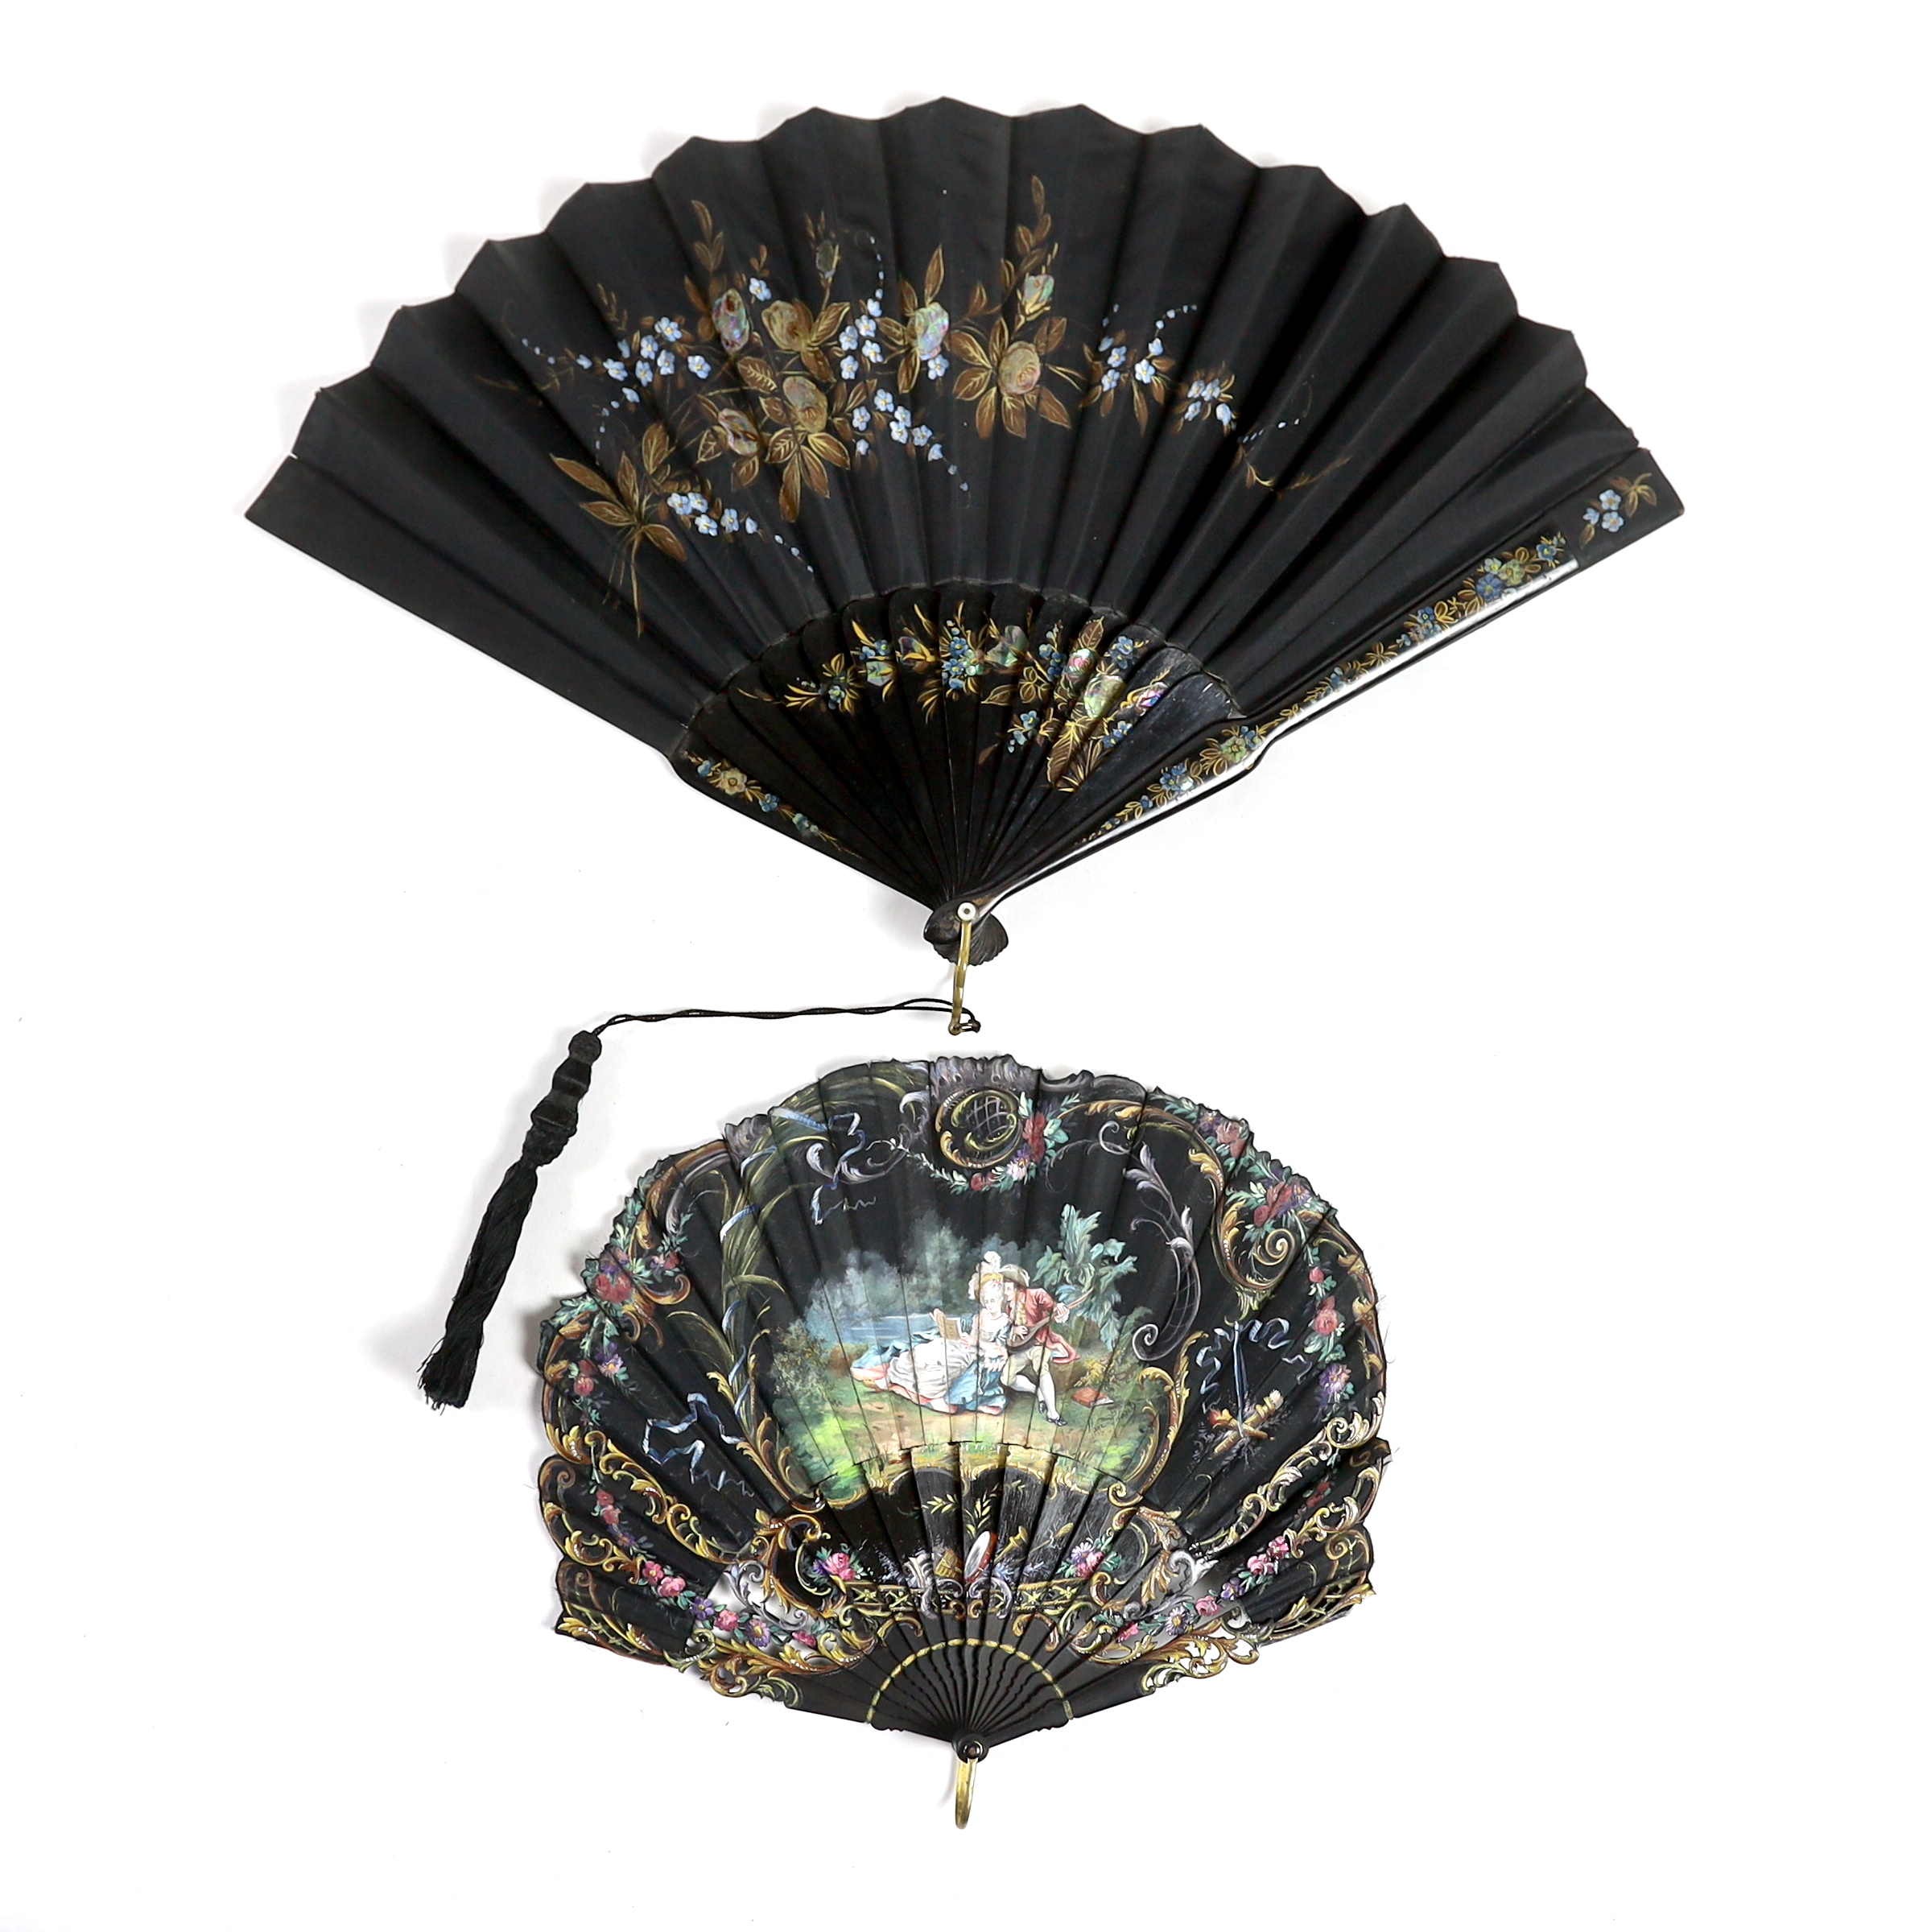 A late 19th century hand painted shaped and carved figurative fan, signed, together with a lacquer and mother of pearl fan, with matching leaf and guard decoration